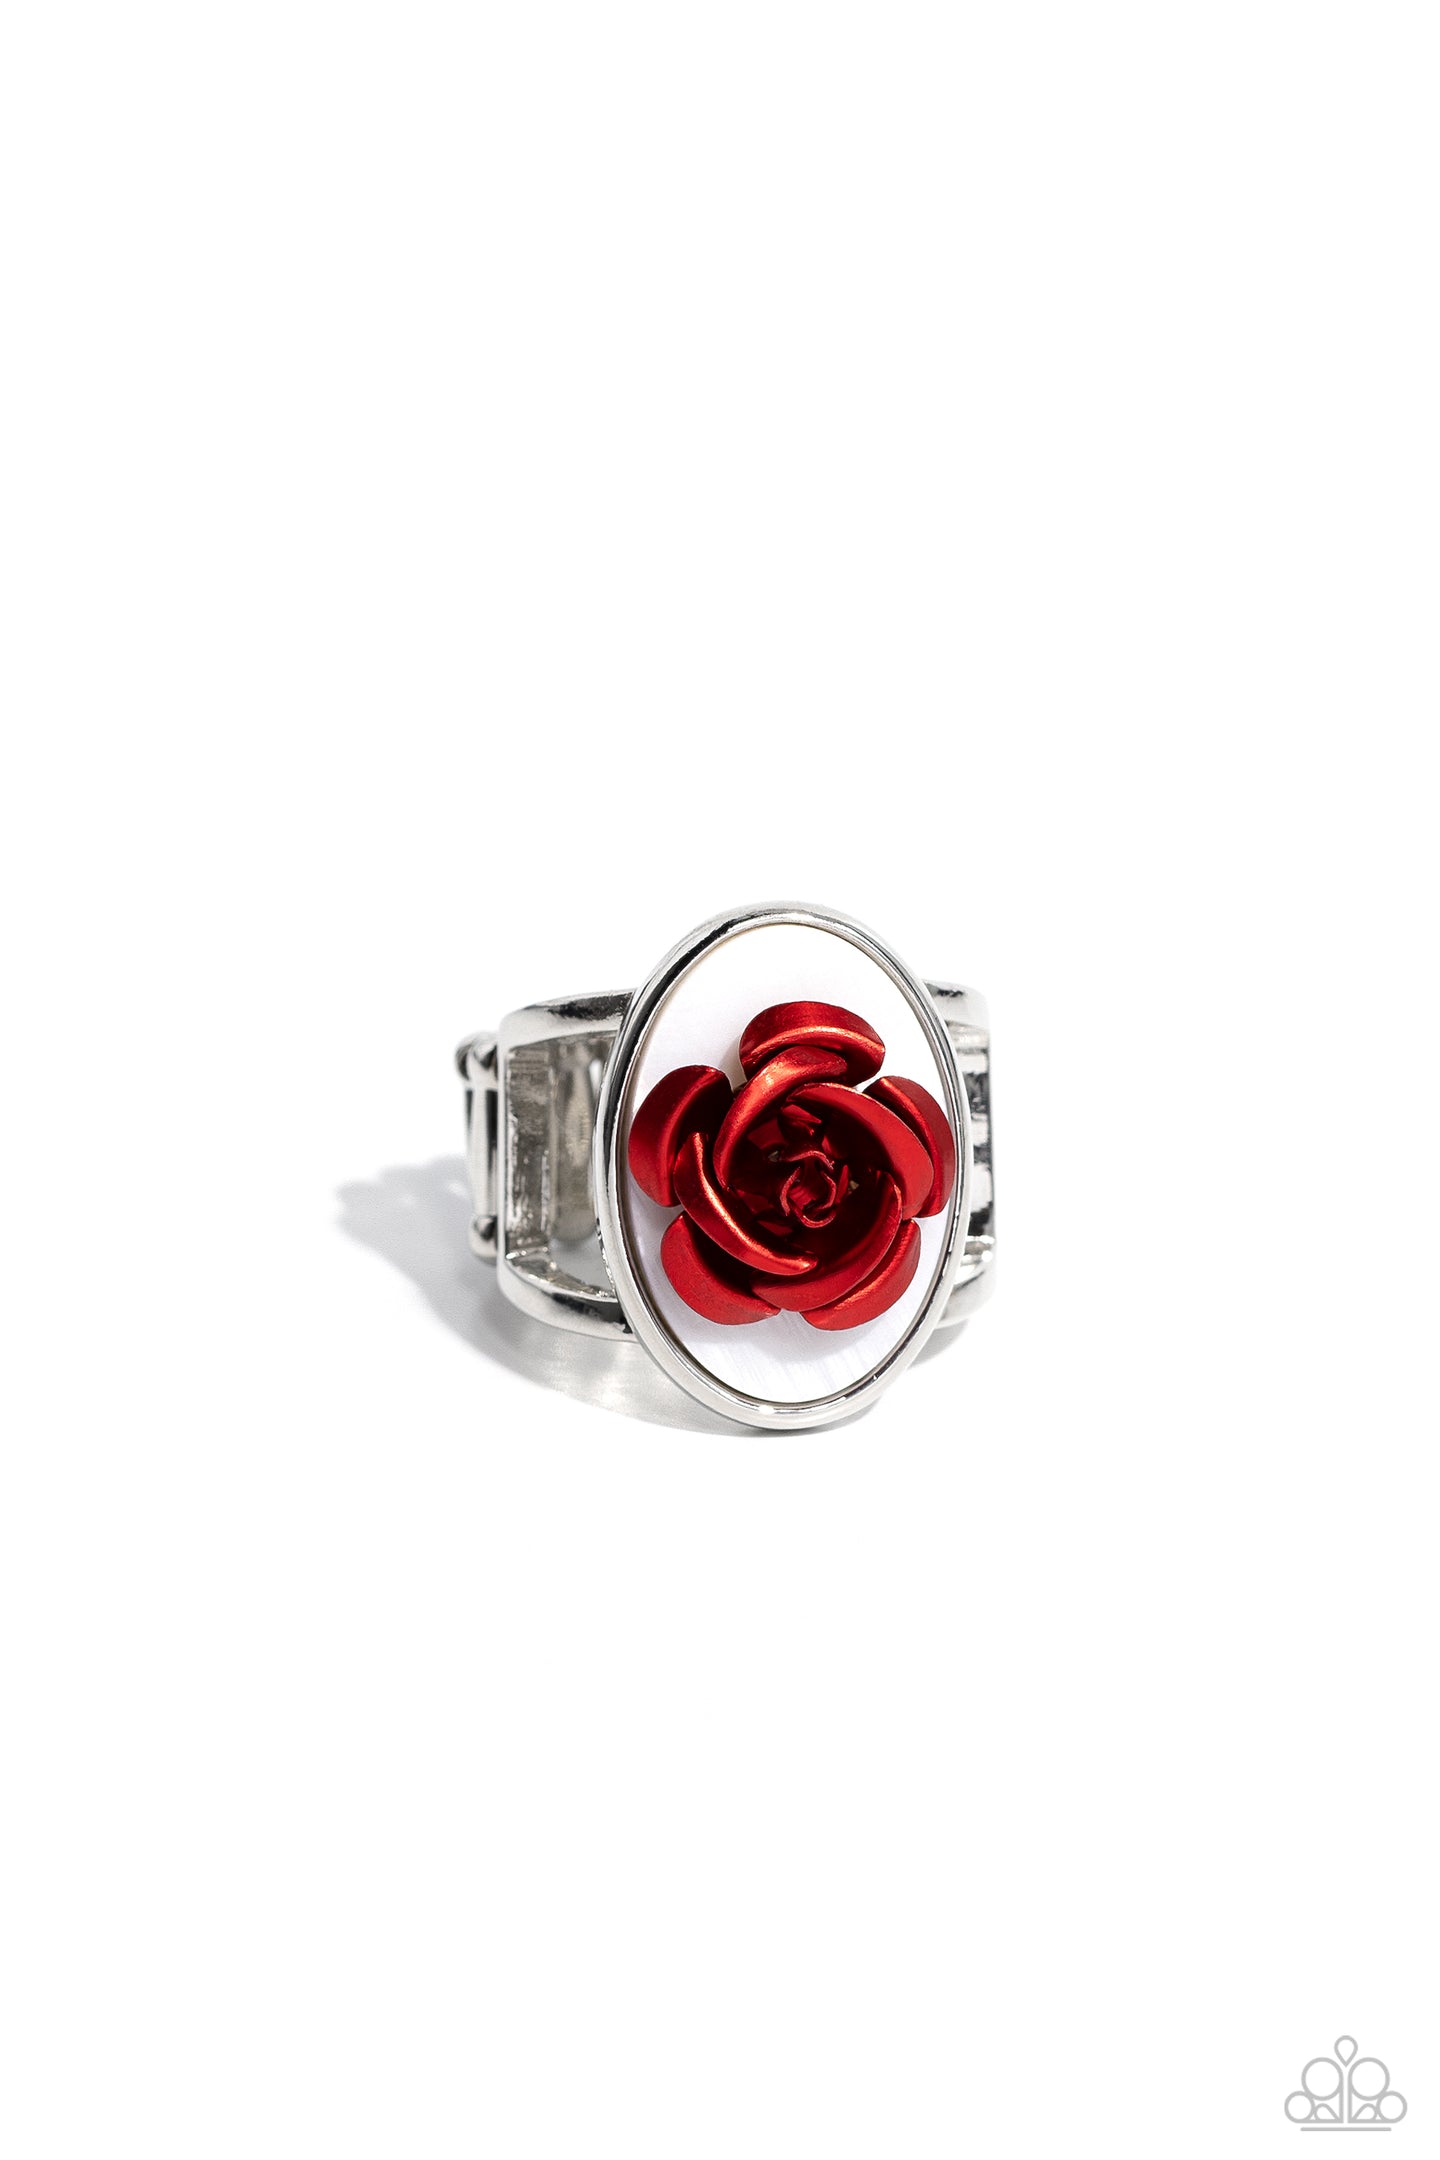 ROSE to My Heart - Red ring 2023 Convention Exclusive